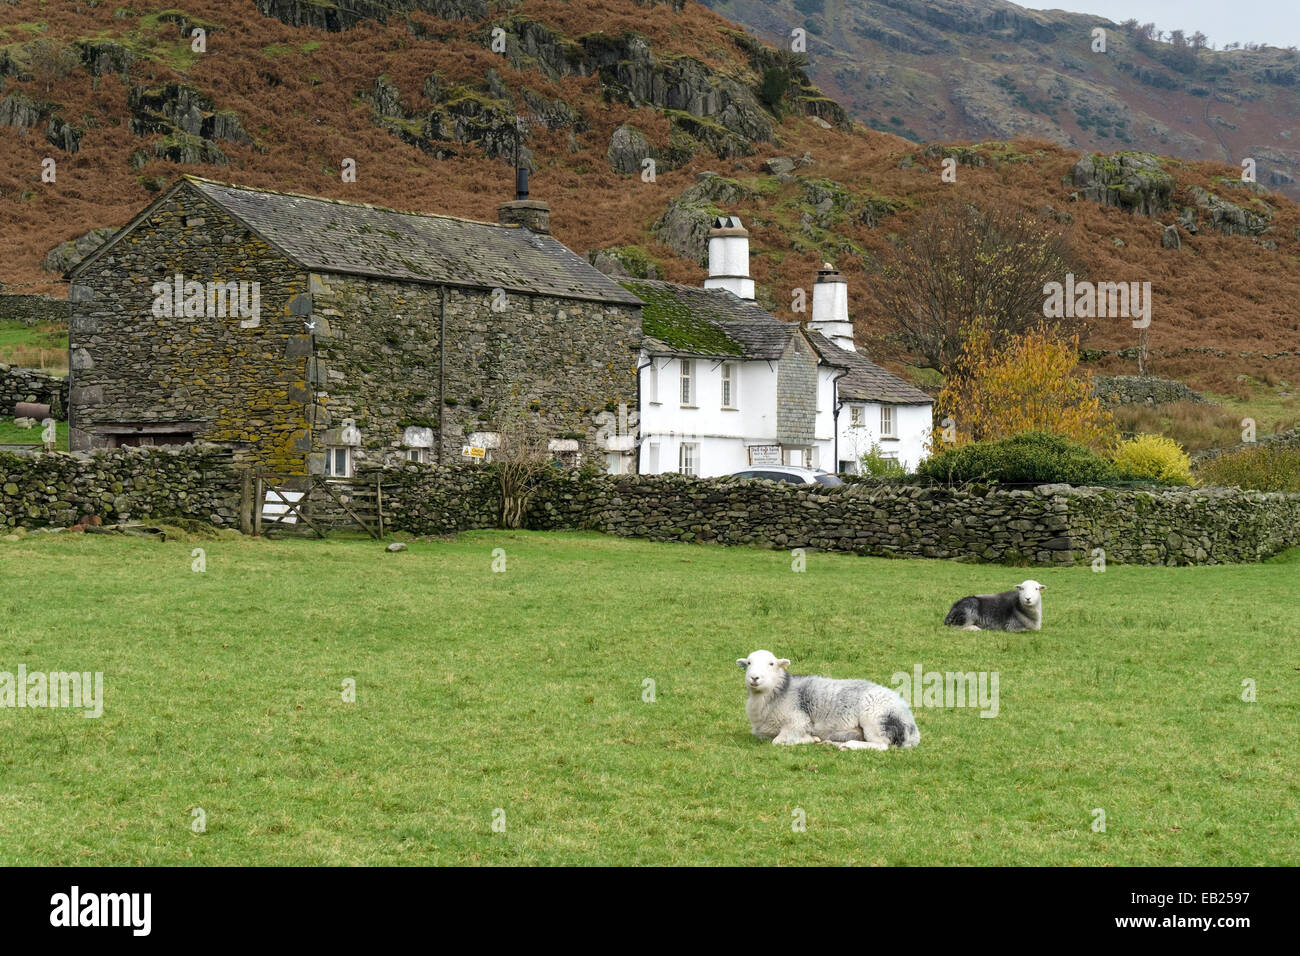 Fell Foot Farm and Herdwick sheep, Little Langdale, Lake District, Cumbria, England, UK. Stock Photo